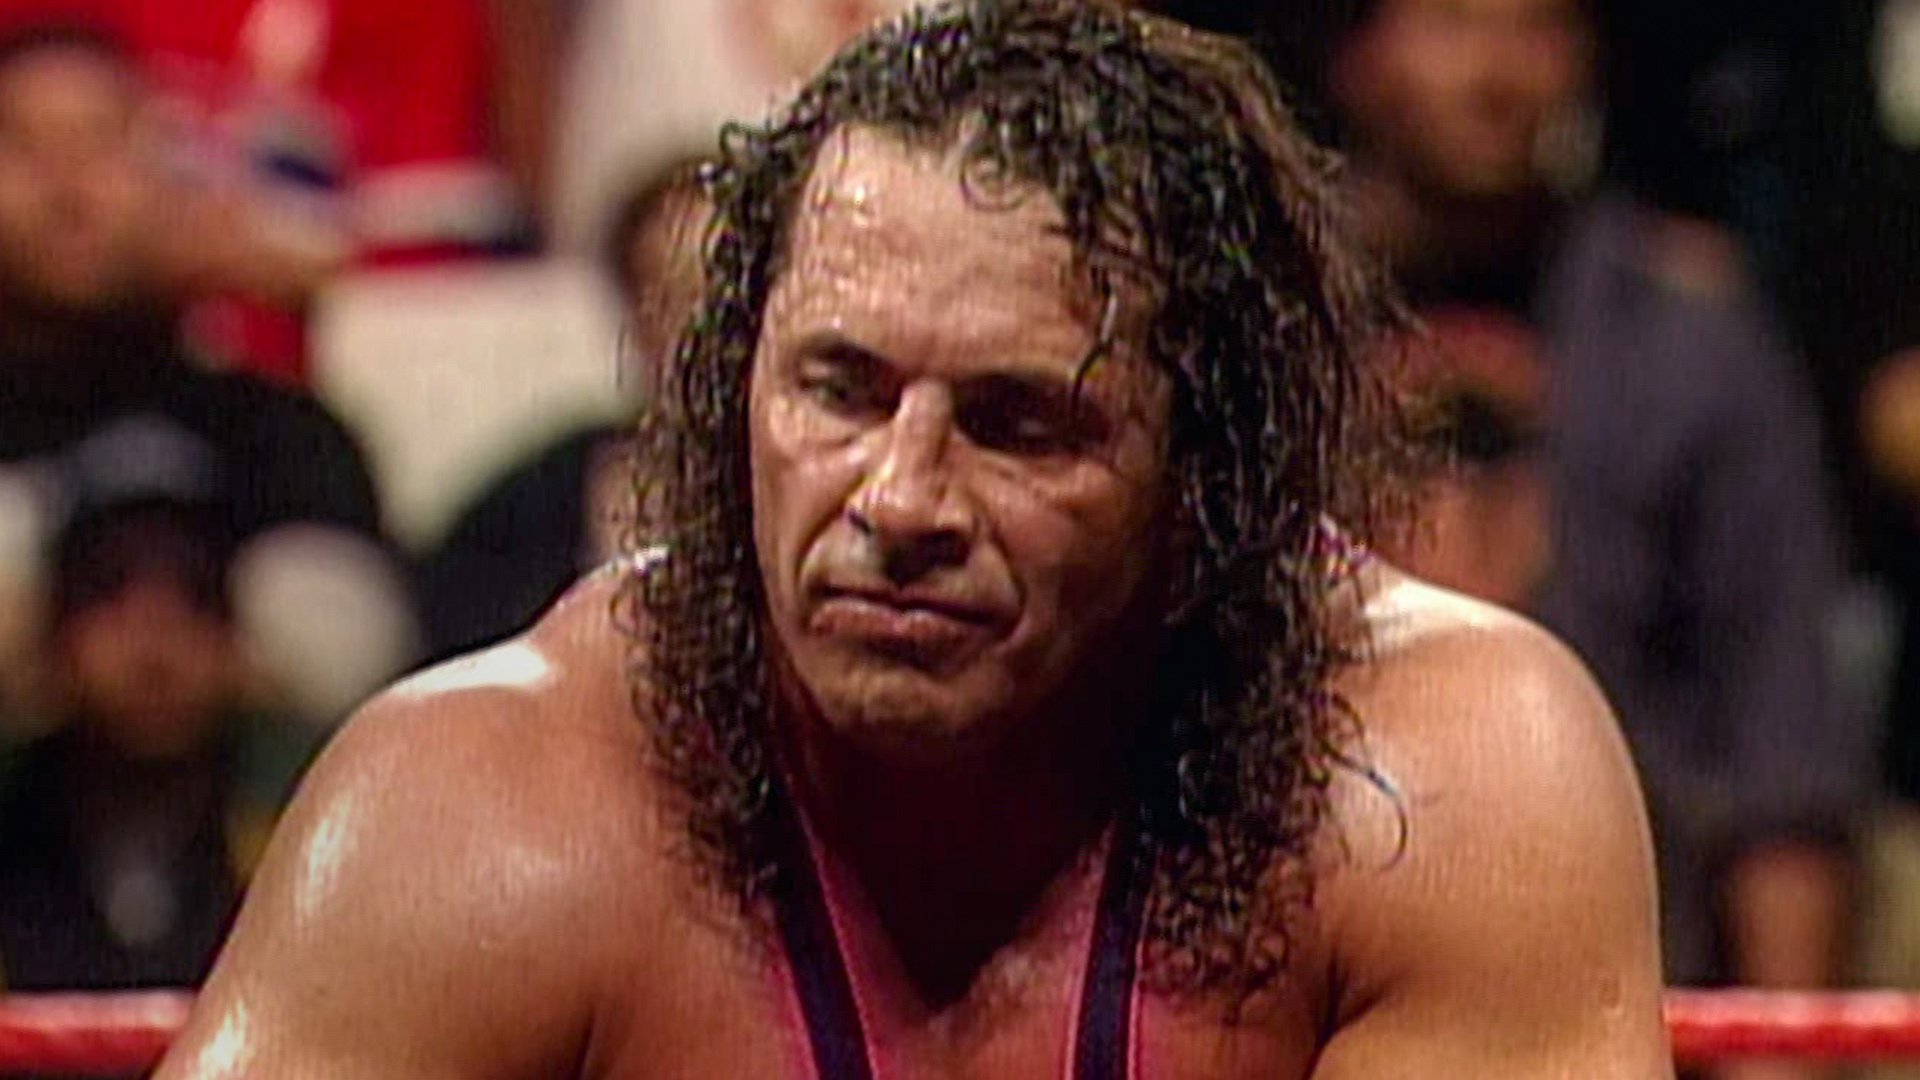 Eric Bischoff Goes Off On 'Whiny' Bret Hart